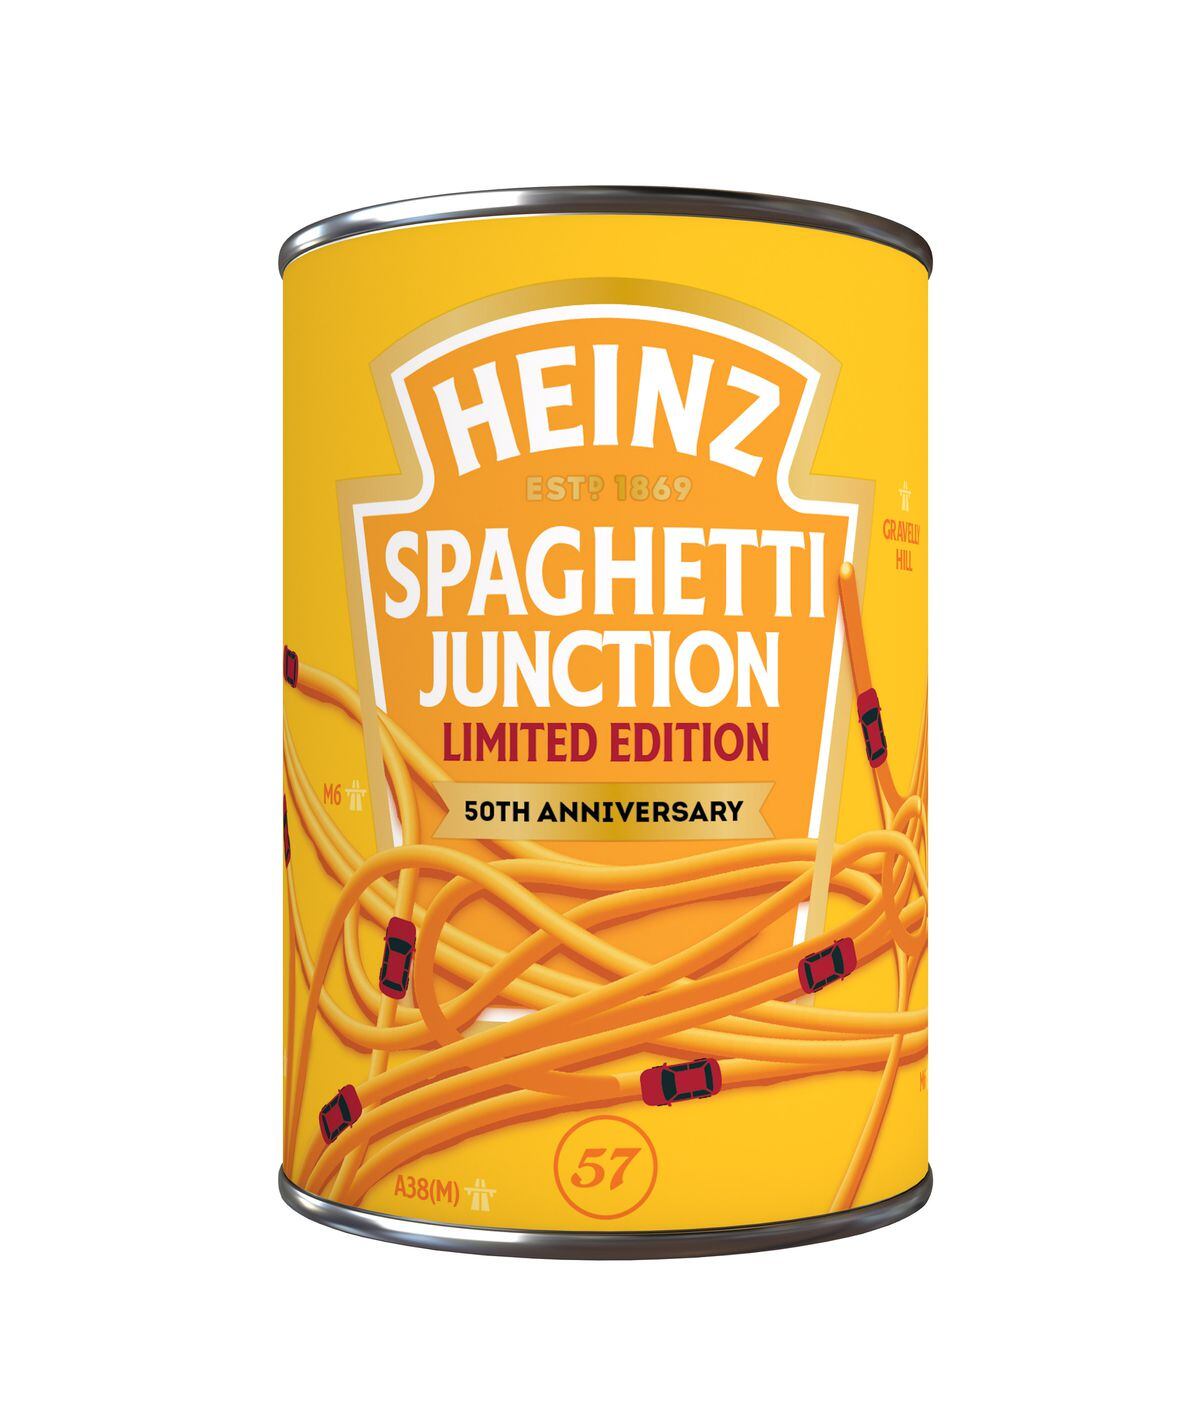 Heinz limited edition can of Heinz Spaghetti Junction pasta created to celebrate the 50th anniversary of Birmingham's Spaghetti Junction